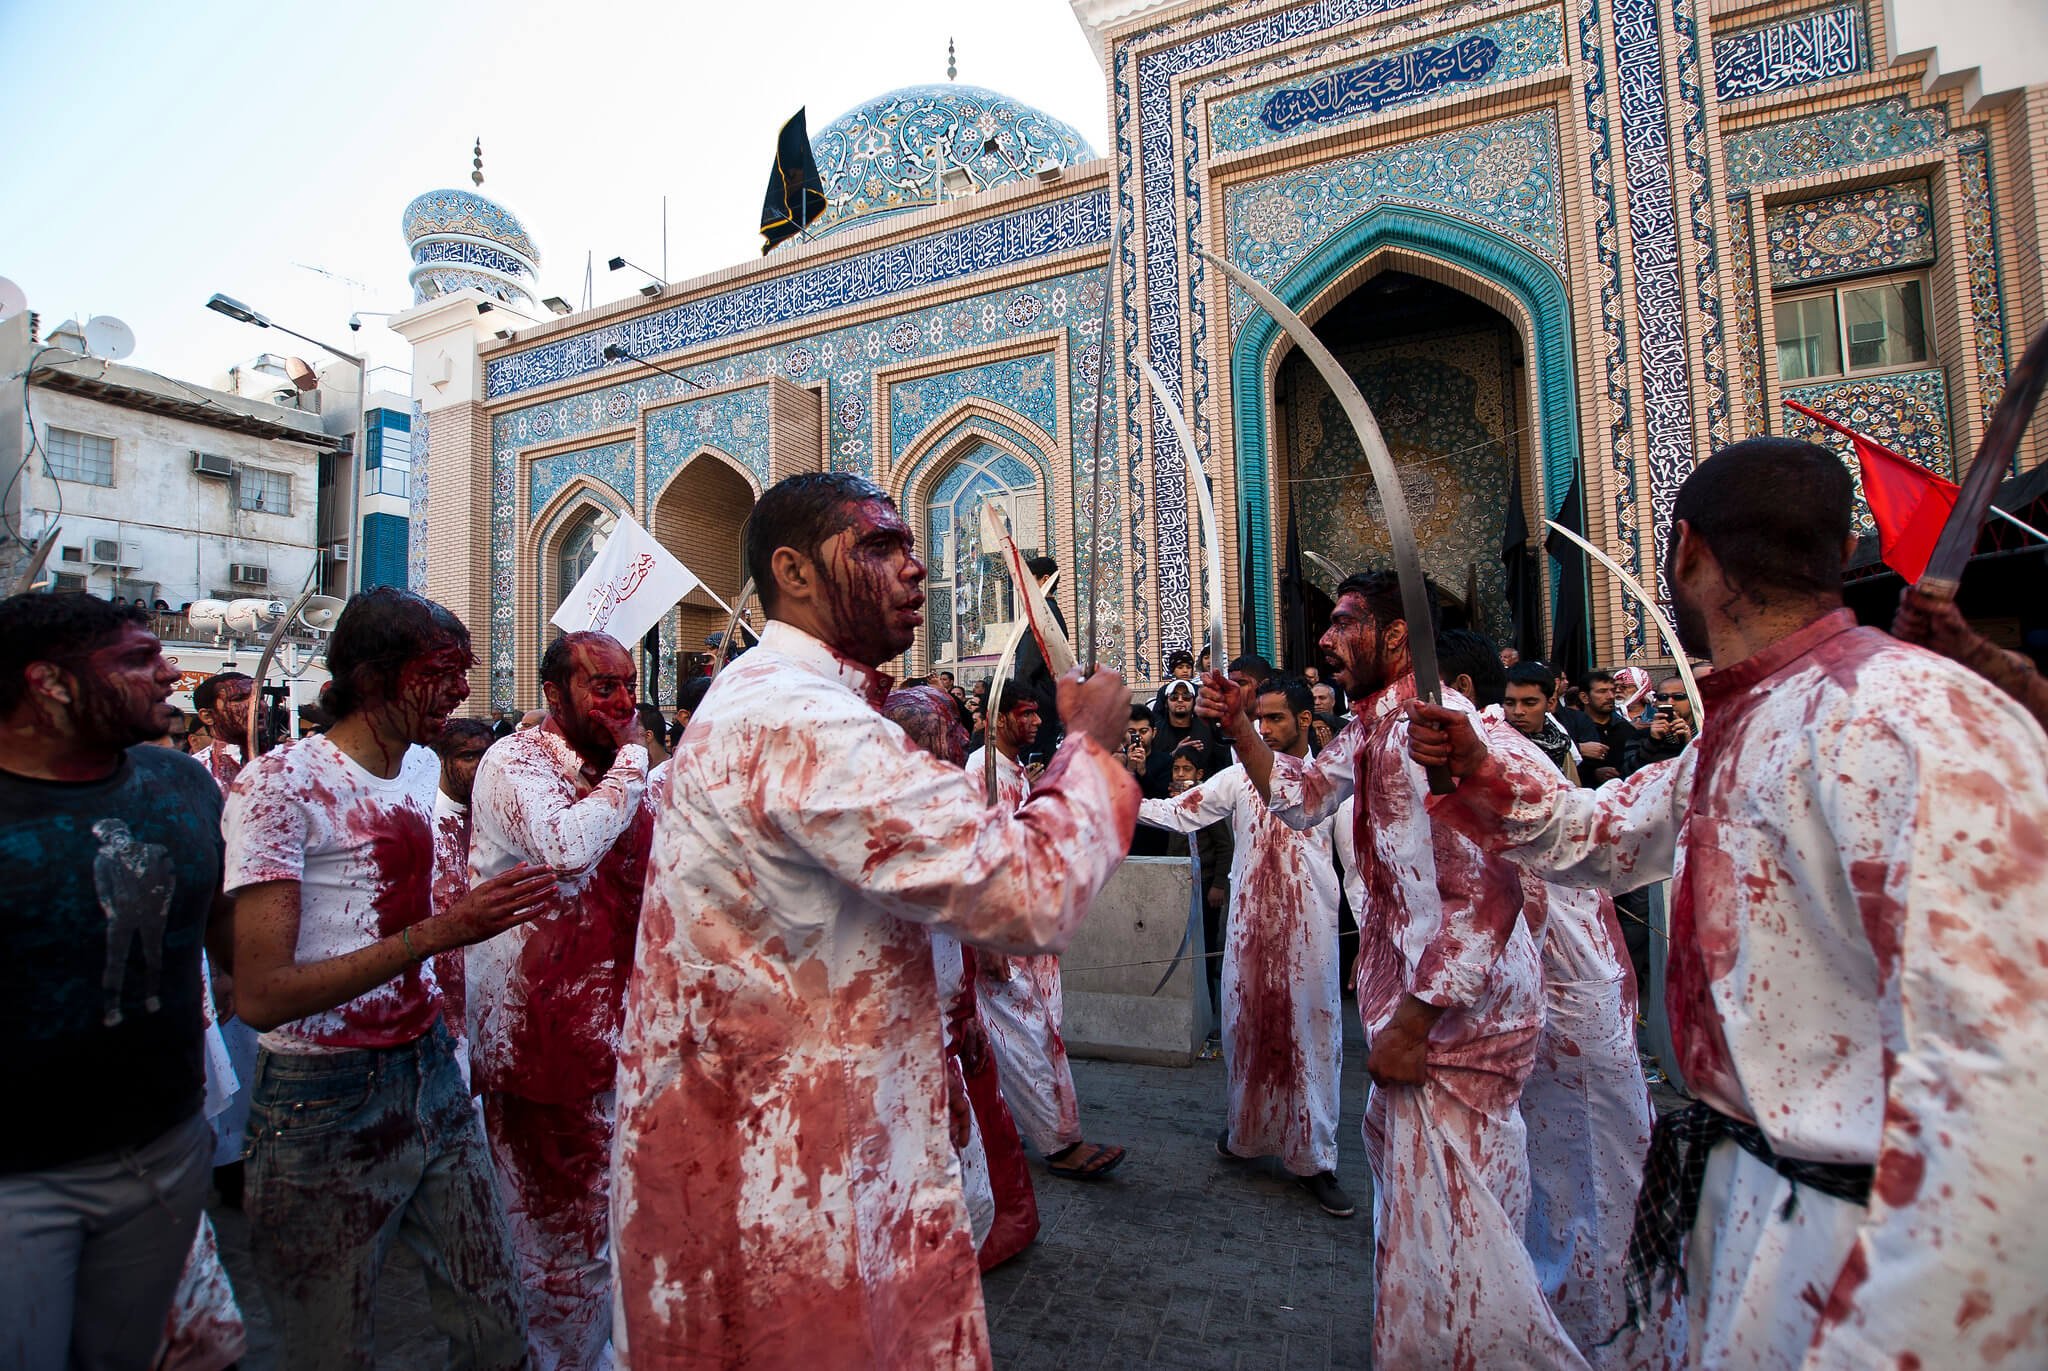 A live demonstration of ritualistic self-flagellation during an Ashura festival.